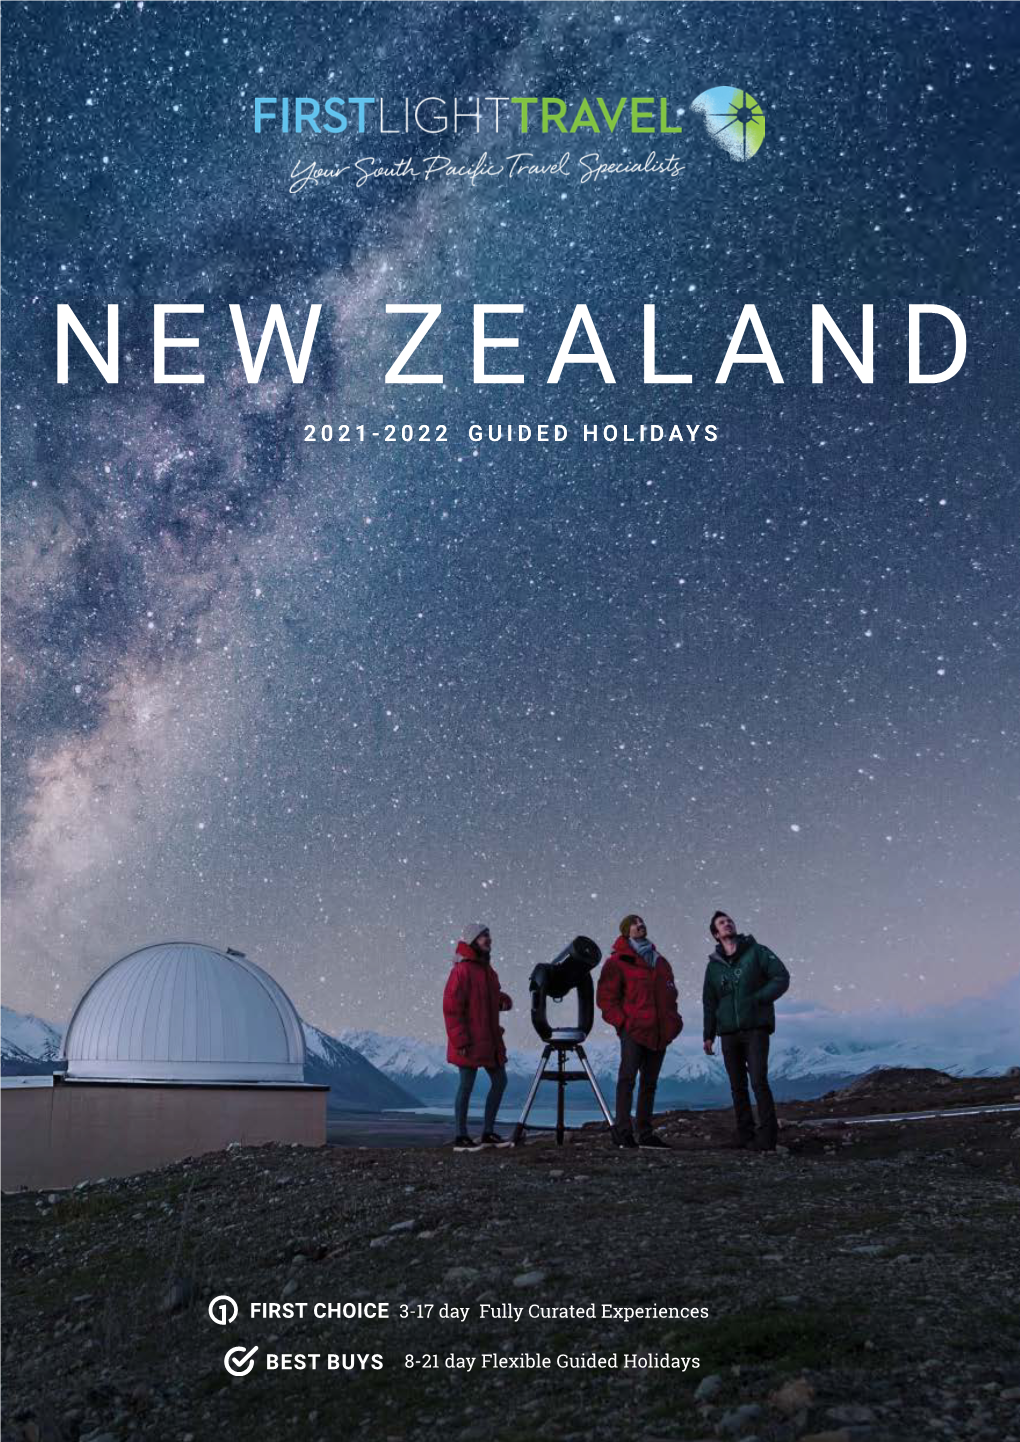 New Zealand 2021-2022 Guided Holidays